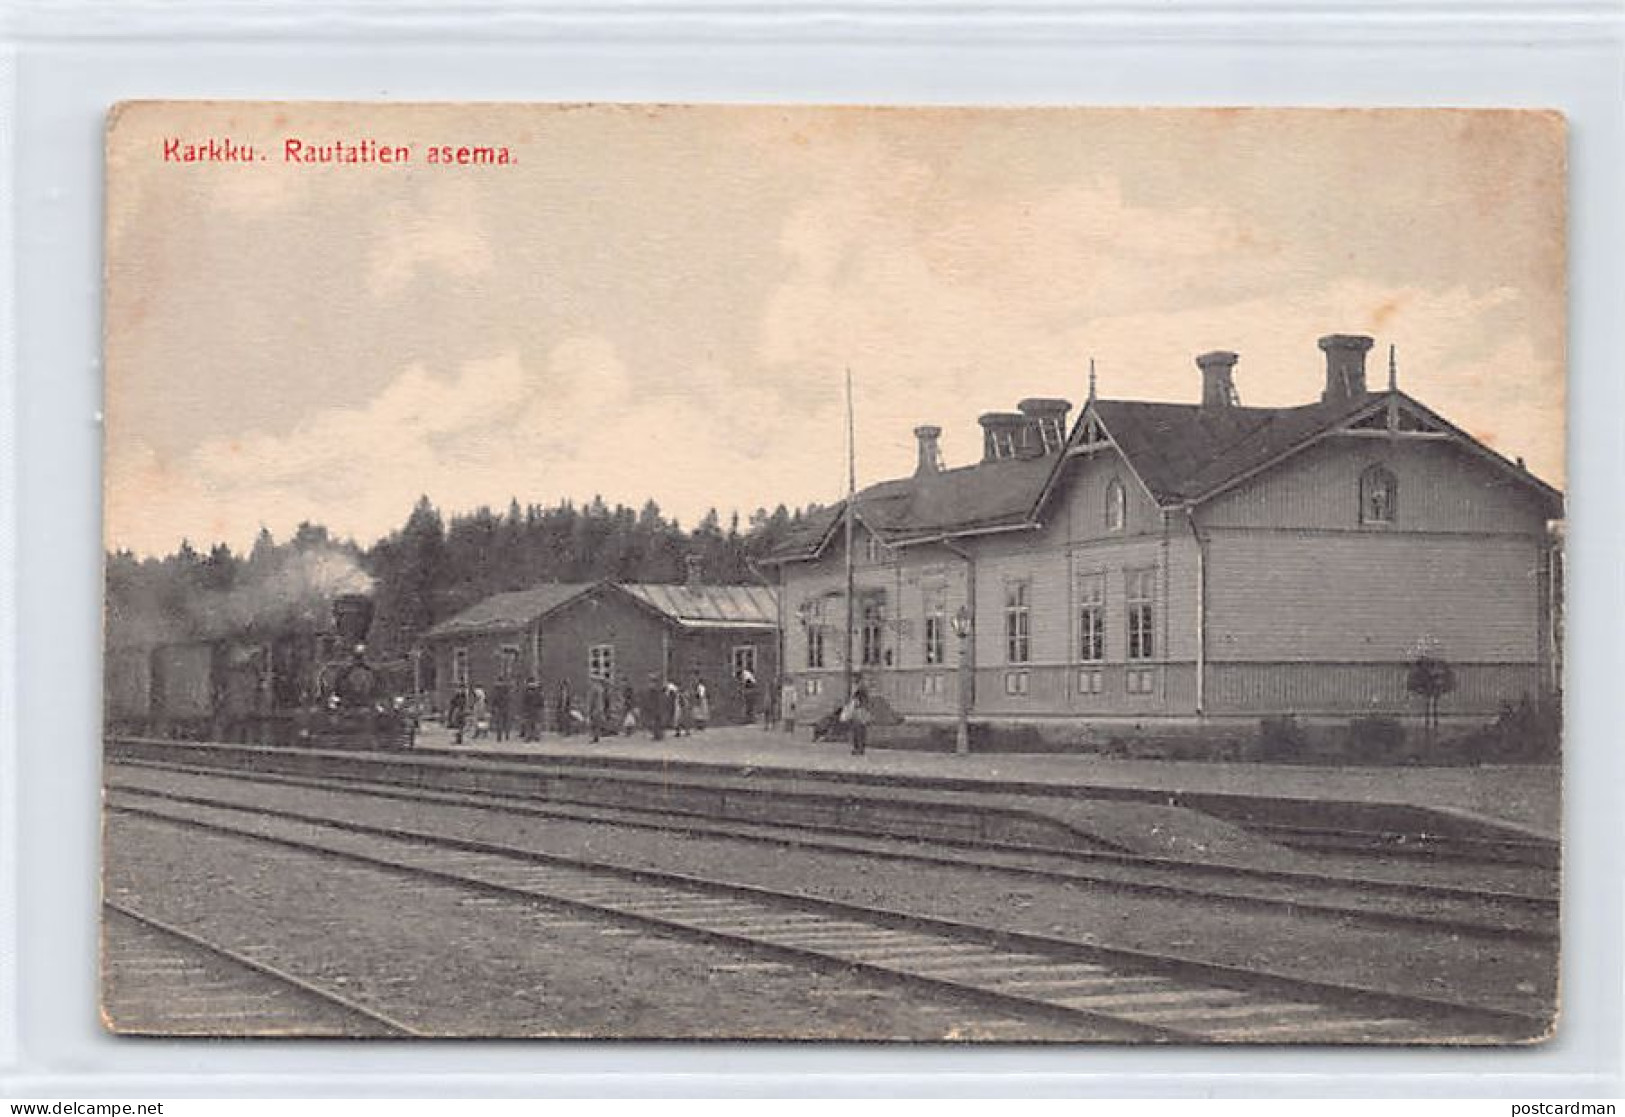 Finland - KARKKU - Railway Station - SEE REVERSE FOR CONDITION - Publ. Unknown  - Finland